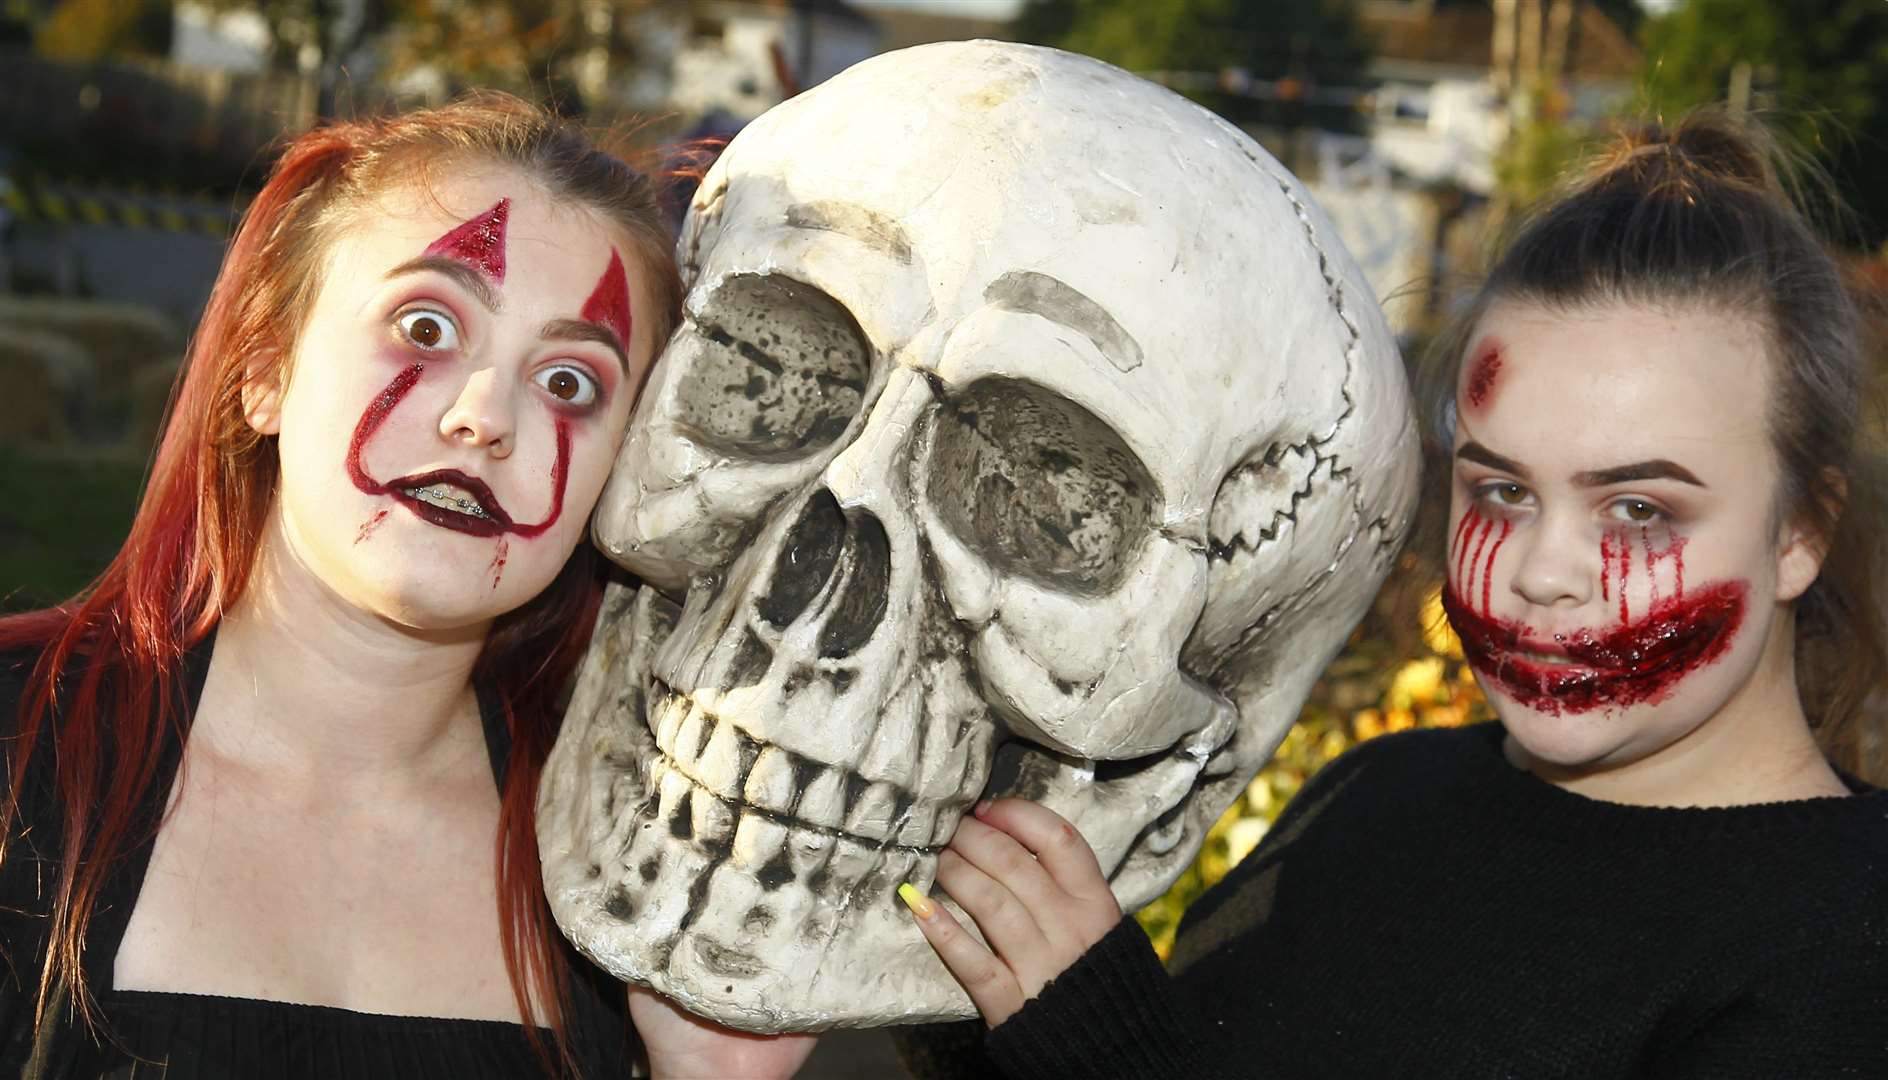 Zombies invade the Shepway Chariots Community Garden: Cheyenne Oakley and Courtney Harris.